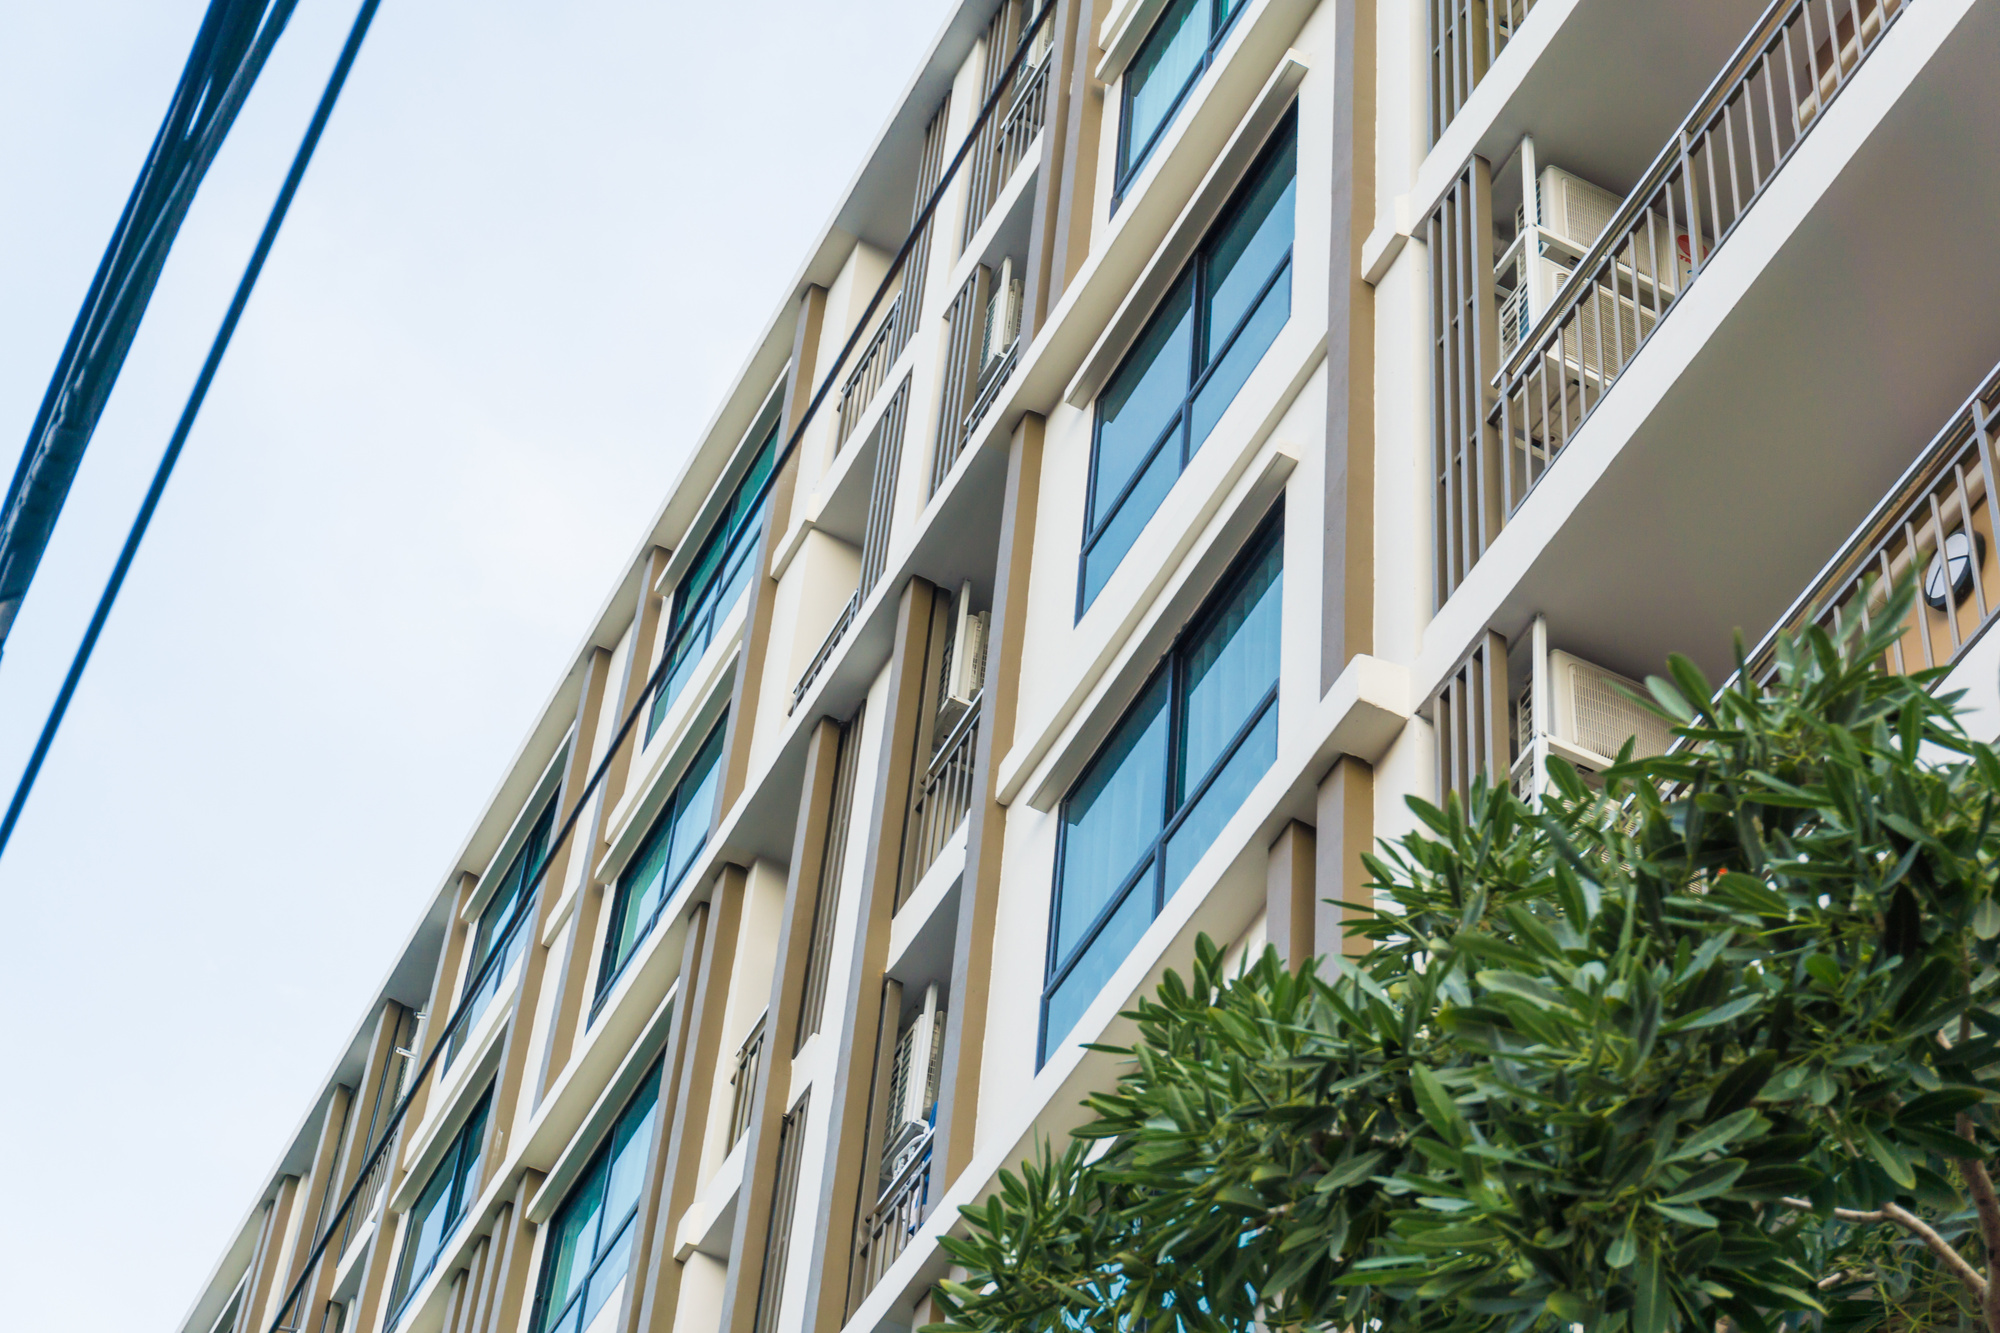 5 Common Condo Purchasing Mistakes and How to Avoid Them